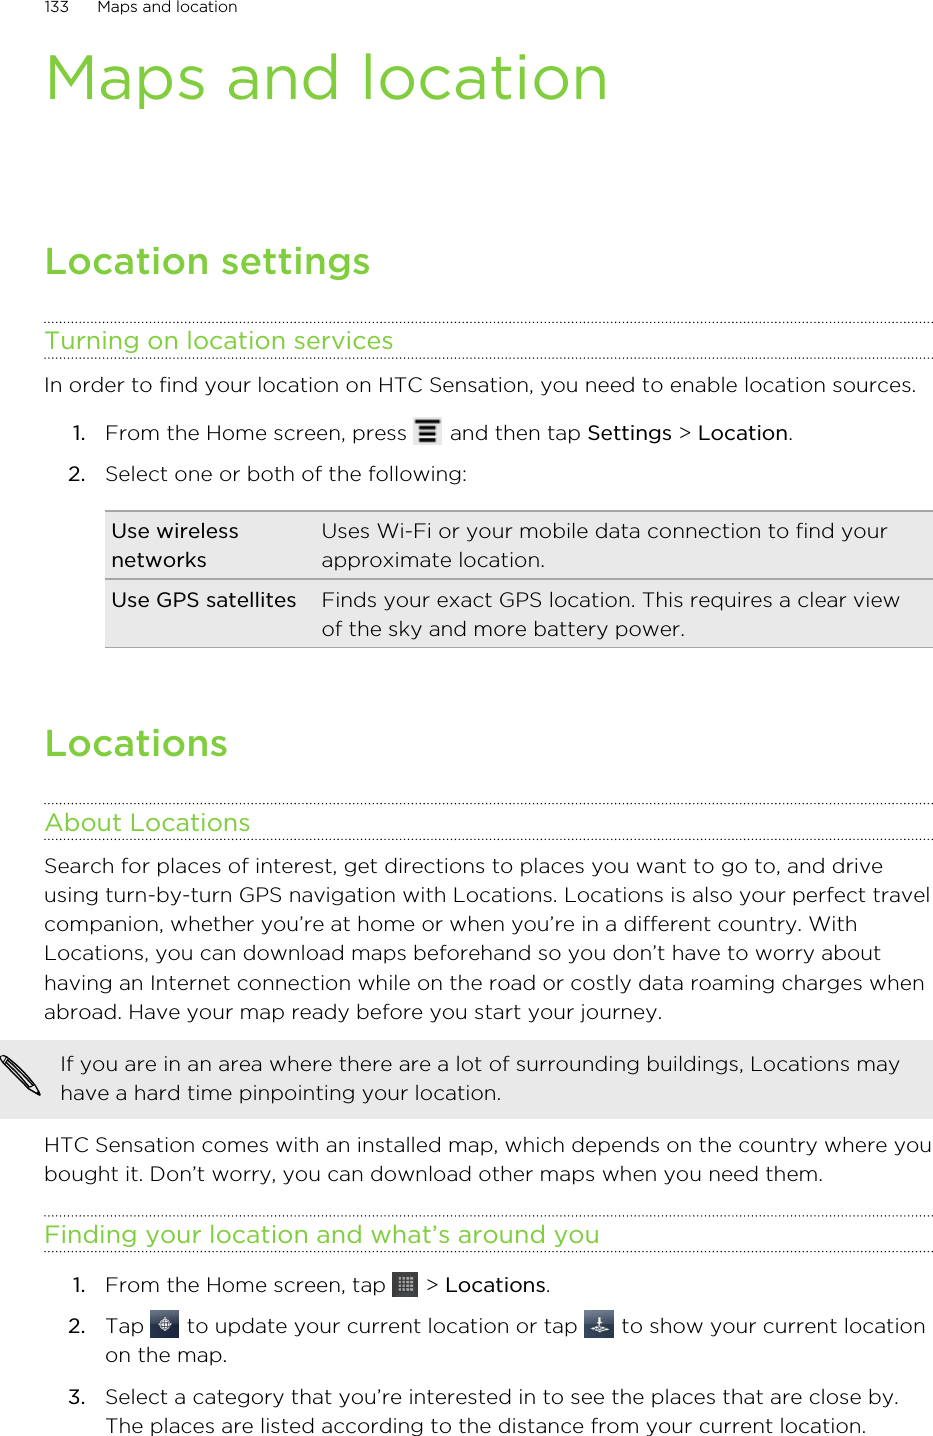 Maps and locationLocation settingsTurning on location servicesIn order to find your location on HTC Sensation, you need to enable location sources.1. From the Home screen, press   and then tap Settings &gt; Location.2. Select one or both of the following:Use wirelessnetworksUses Wi-Fi or your mobile data connection to find yourapproximate location.Use GPS satellites Finds your exact GPS location. This requires a clear viewof the sky and more battery power.LocationsAbout LocationsSearch for places of interest, get directions to places you want to go to, and driveusing turn-by-turn GPS navigation with Locations. Locations is also your perfect travelcompanion, whether you’re at home or when you’re in a different country. WithLocations, you can download maps beforehand so you don’t have to worry abouthaving an Internet connection while on the road or costly data roaming charges whenabroad. Have your map ready before you start your journey.If you are in an area where there are a lot of surrounding buildings, Locations mayhave a hard time pinpointing your location.HTC Sensation comes with an installed map, which depends on the country where youbought it. Don’t worry, you can download other maps when you need them.Finding your location and what’s around you1. From the Home screen, tap   &gt; Locations.2. Tap   to update your current location or tap   to show your current locationon the map.3. Select a category that you’re interested in to see the places that are close by.The places are listed according to the distance from your current location.133 Maps and location